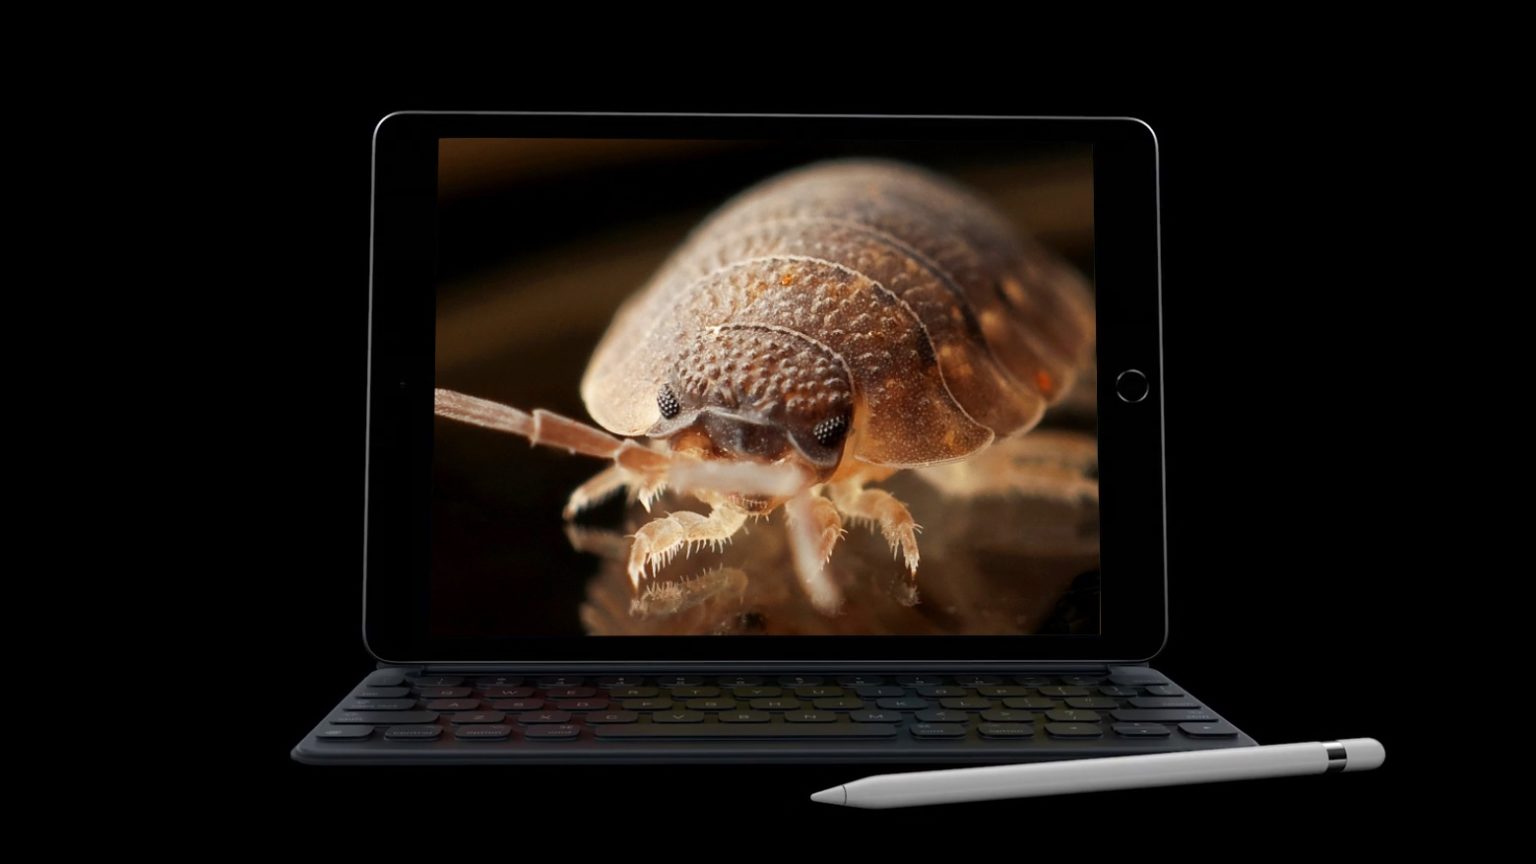 Even the best iPads have bugs